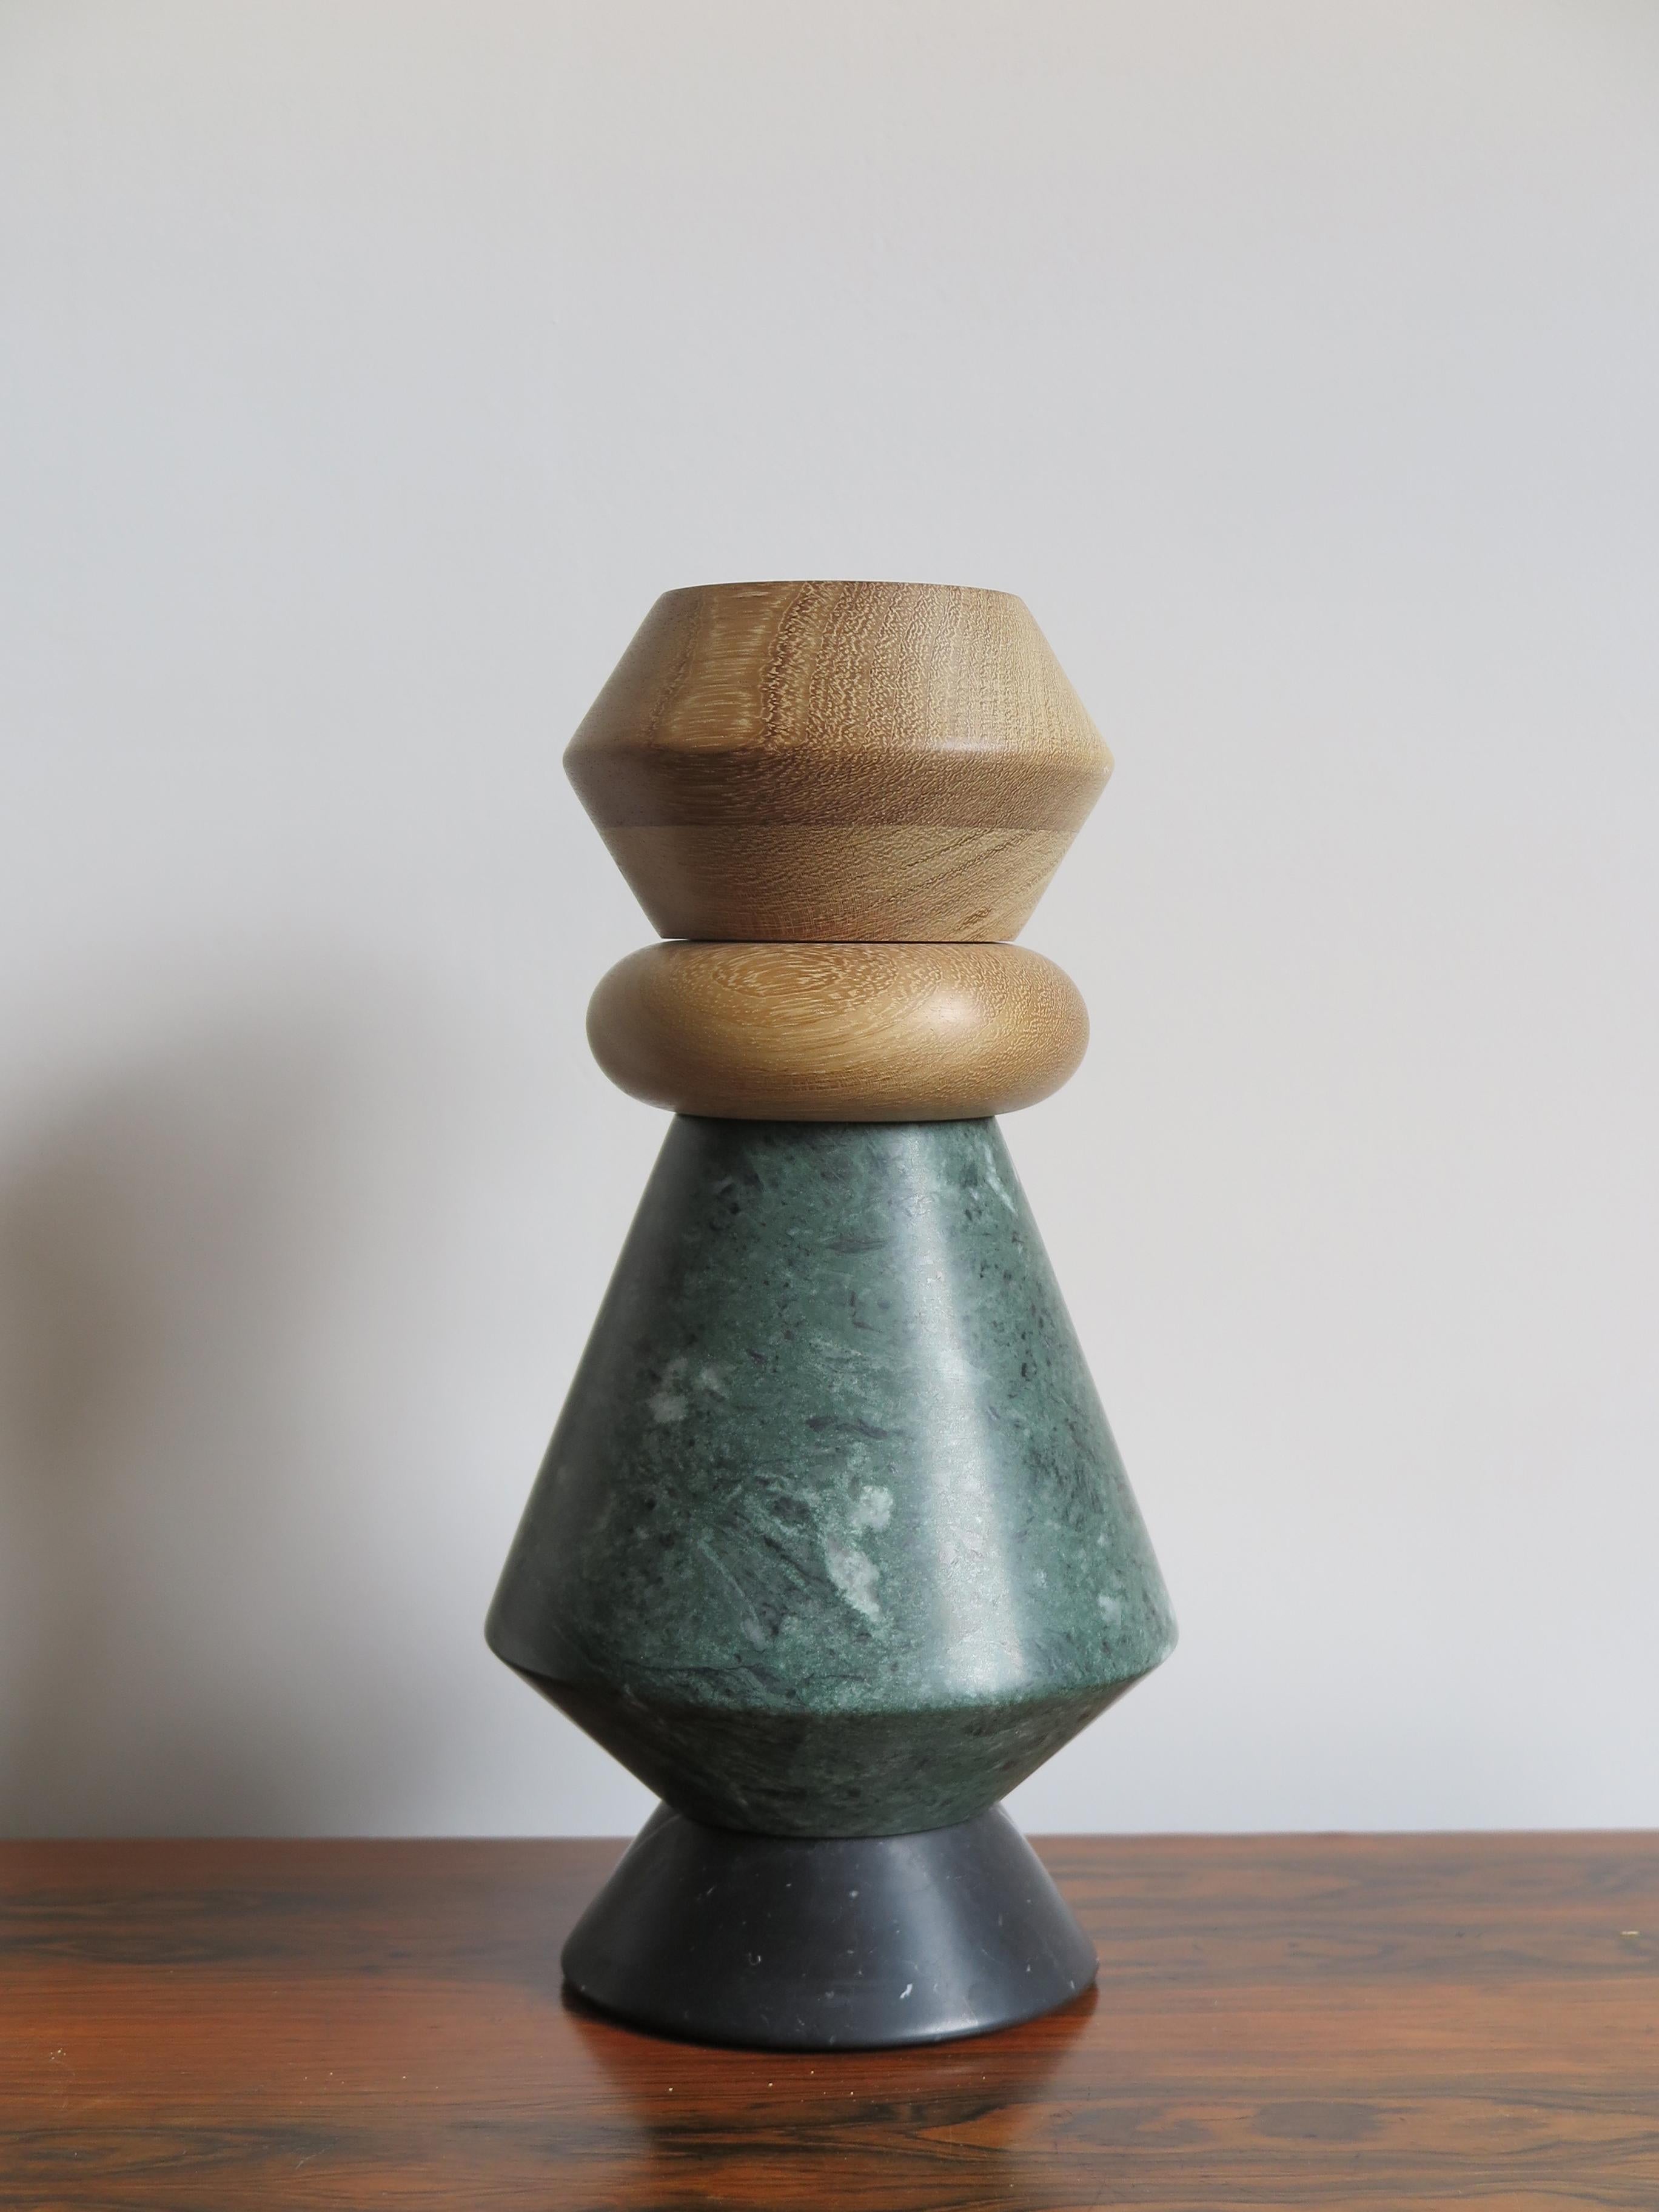 Wood and Marble Contemporary Sculpture, Candleholders, Flower Vase 